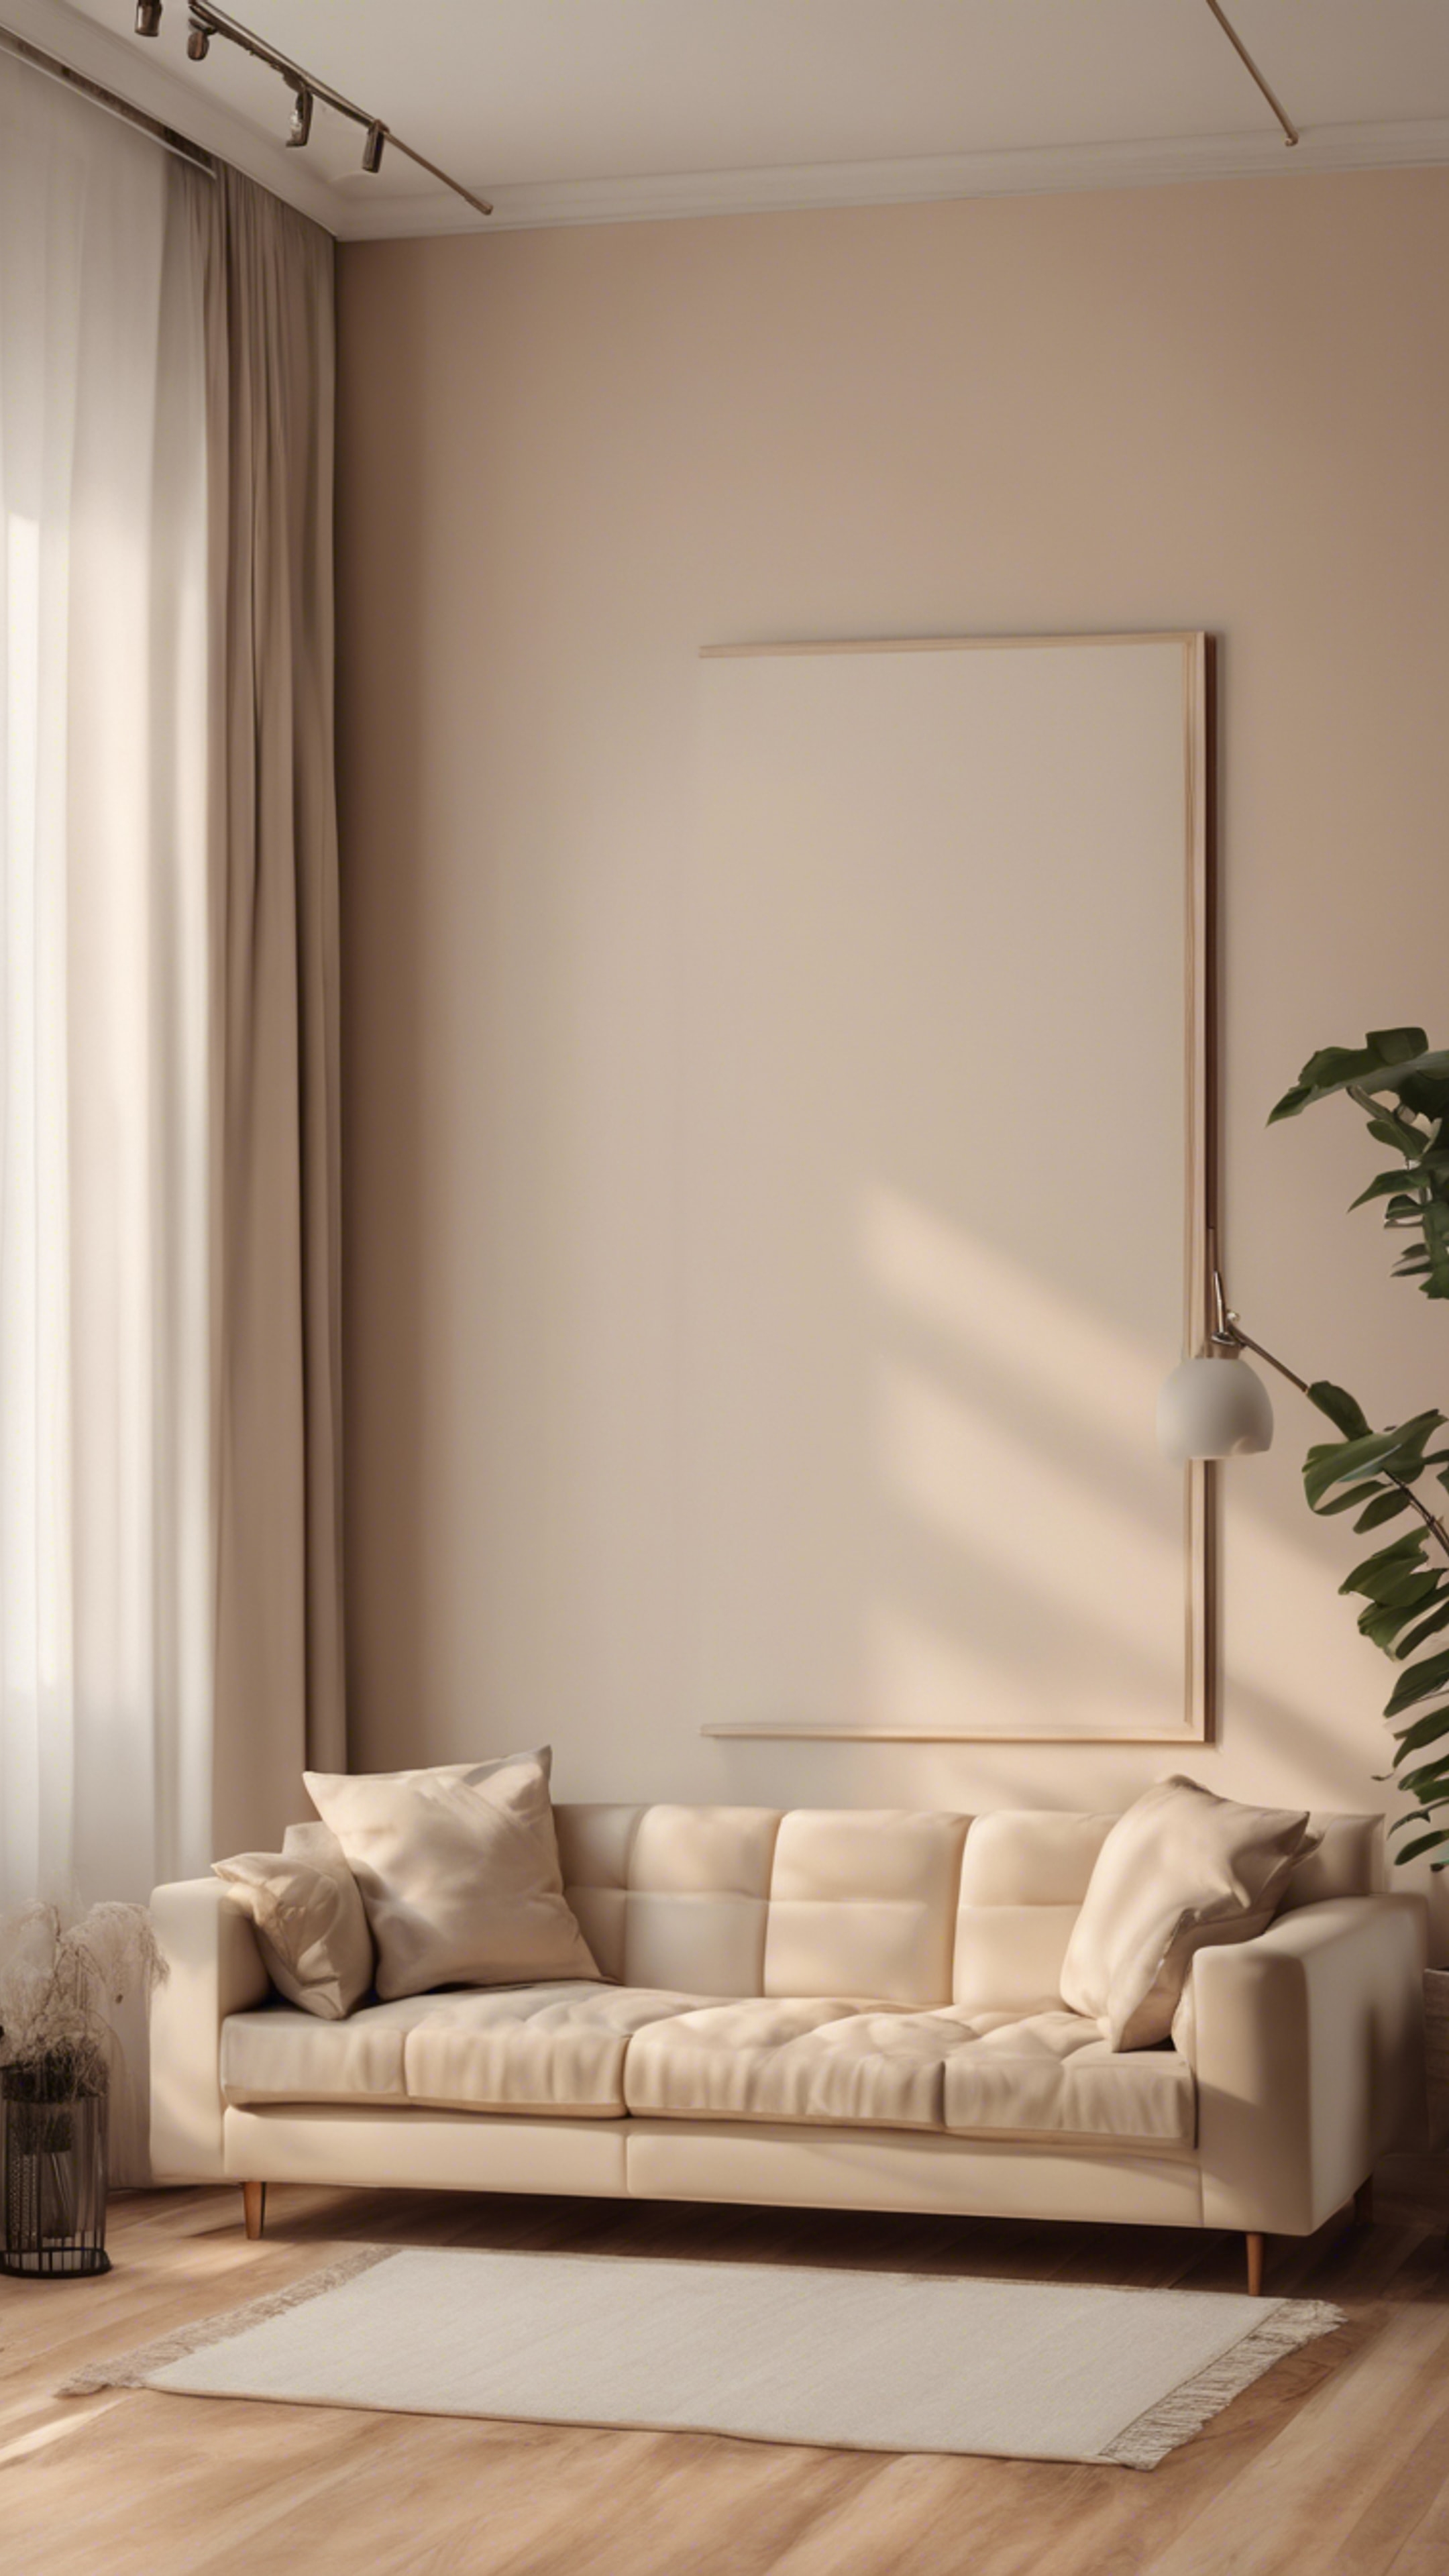 A minimalist room with beige walls, wooden floor, and comfortable beige-colored sofa. Tapéta[282520d07896429087dc]